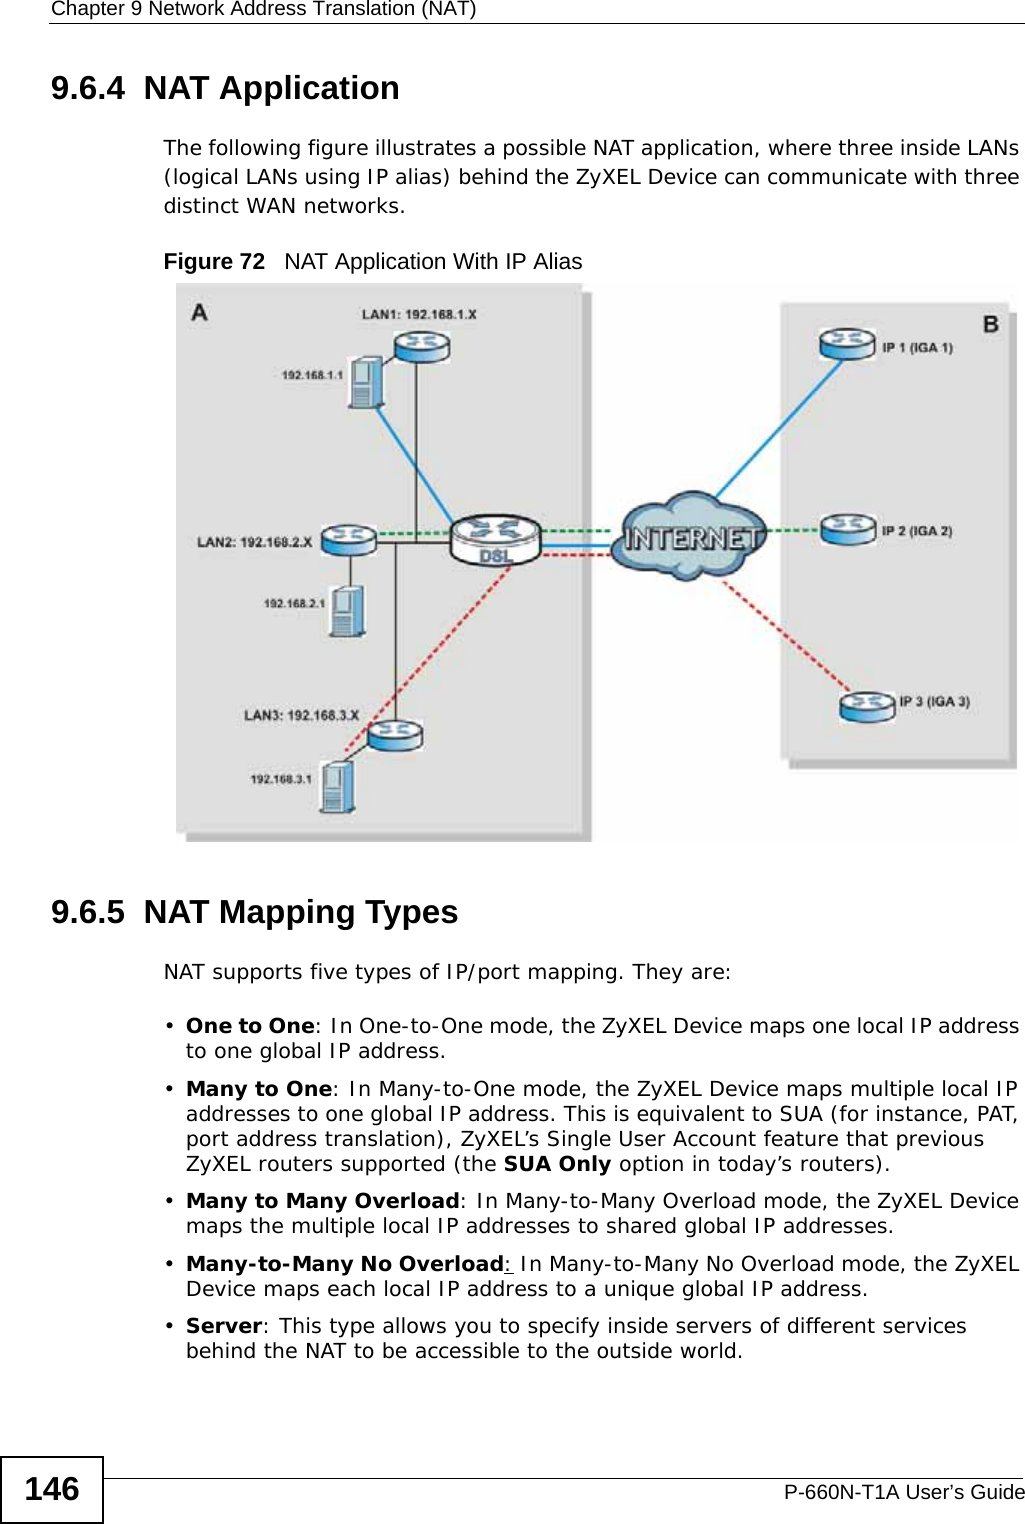 Chapter 9 Network Address Translation (NAT)P-660N-T1A User’s Guide1469.6.4  NAT ApplicationThe following figure illustrates a possible NAT application, where three inside LANs (logical LANs using IP alias) behind the ZyXEL Device can communicate with three distinct WAN networks.Figure 72   NAT Application With IP Alias9.6.5  NAT Mapping TypesNAT supports five types of IP/port mapping. They are:•One to One: In One-to-One mode, the ZyXEL Device maps one local IP address to one global IP address.•Many to One: In Many-to-One mode, the ZyXEL Device maps multiple local IP addresses to one global IP address. This is equivalent to SUA (for instance, PAT, port address translation), ZyXEL’s Single User Account feature that previous ZyXEL routers supported (the SUA Only option in today’s routers). •Many to Many Overload: In Many-to-Many Overload mode, the ZyXEL Device maps the multiple local IP addresses to shared global IP addresses.•Many-to-Many No Overload: In Many-to-Many No Overload mode, the ZyXEL Device maps each local IP address to a unique global IP address. •Server: This type allows you to specify inside servers of different services behind the NAT to be accessible to the outside world.